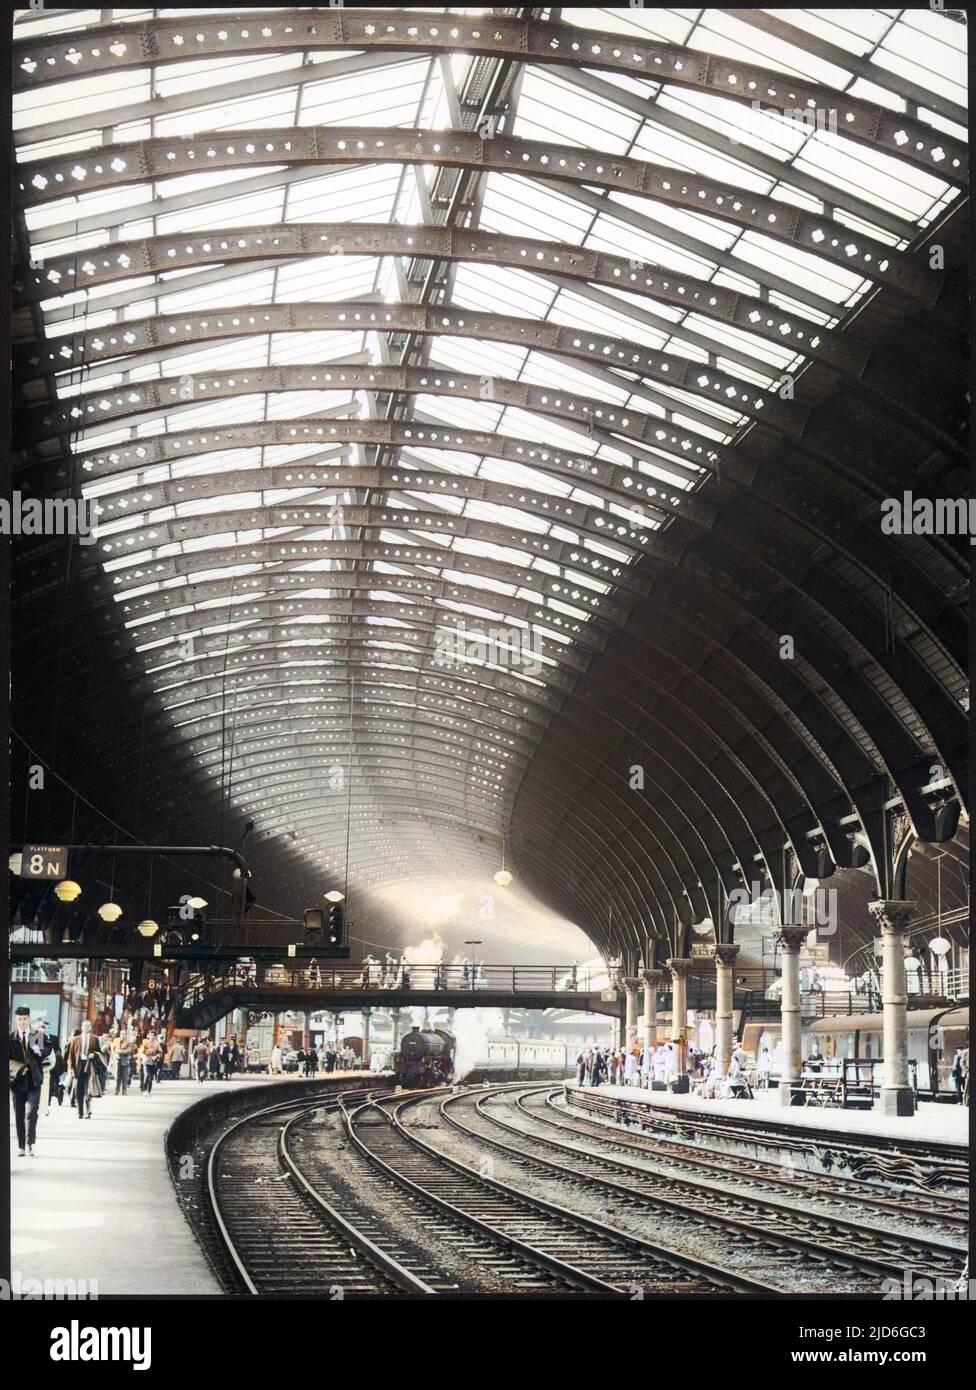 A steam train entering York railway station, Yorkshire, England. Colourised version of : 10170994       Date: circa 1960 Stock Photo